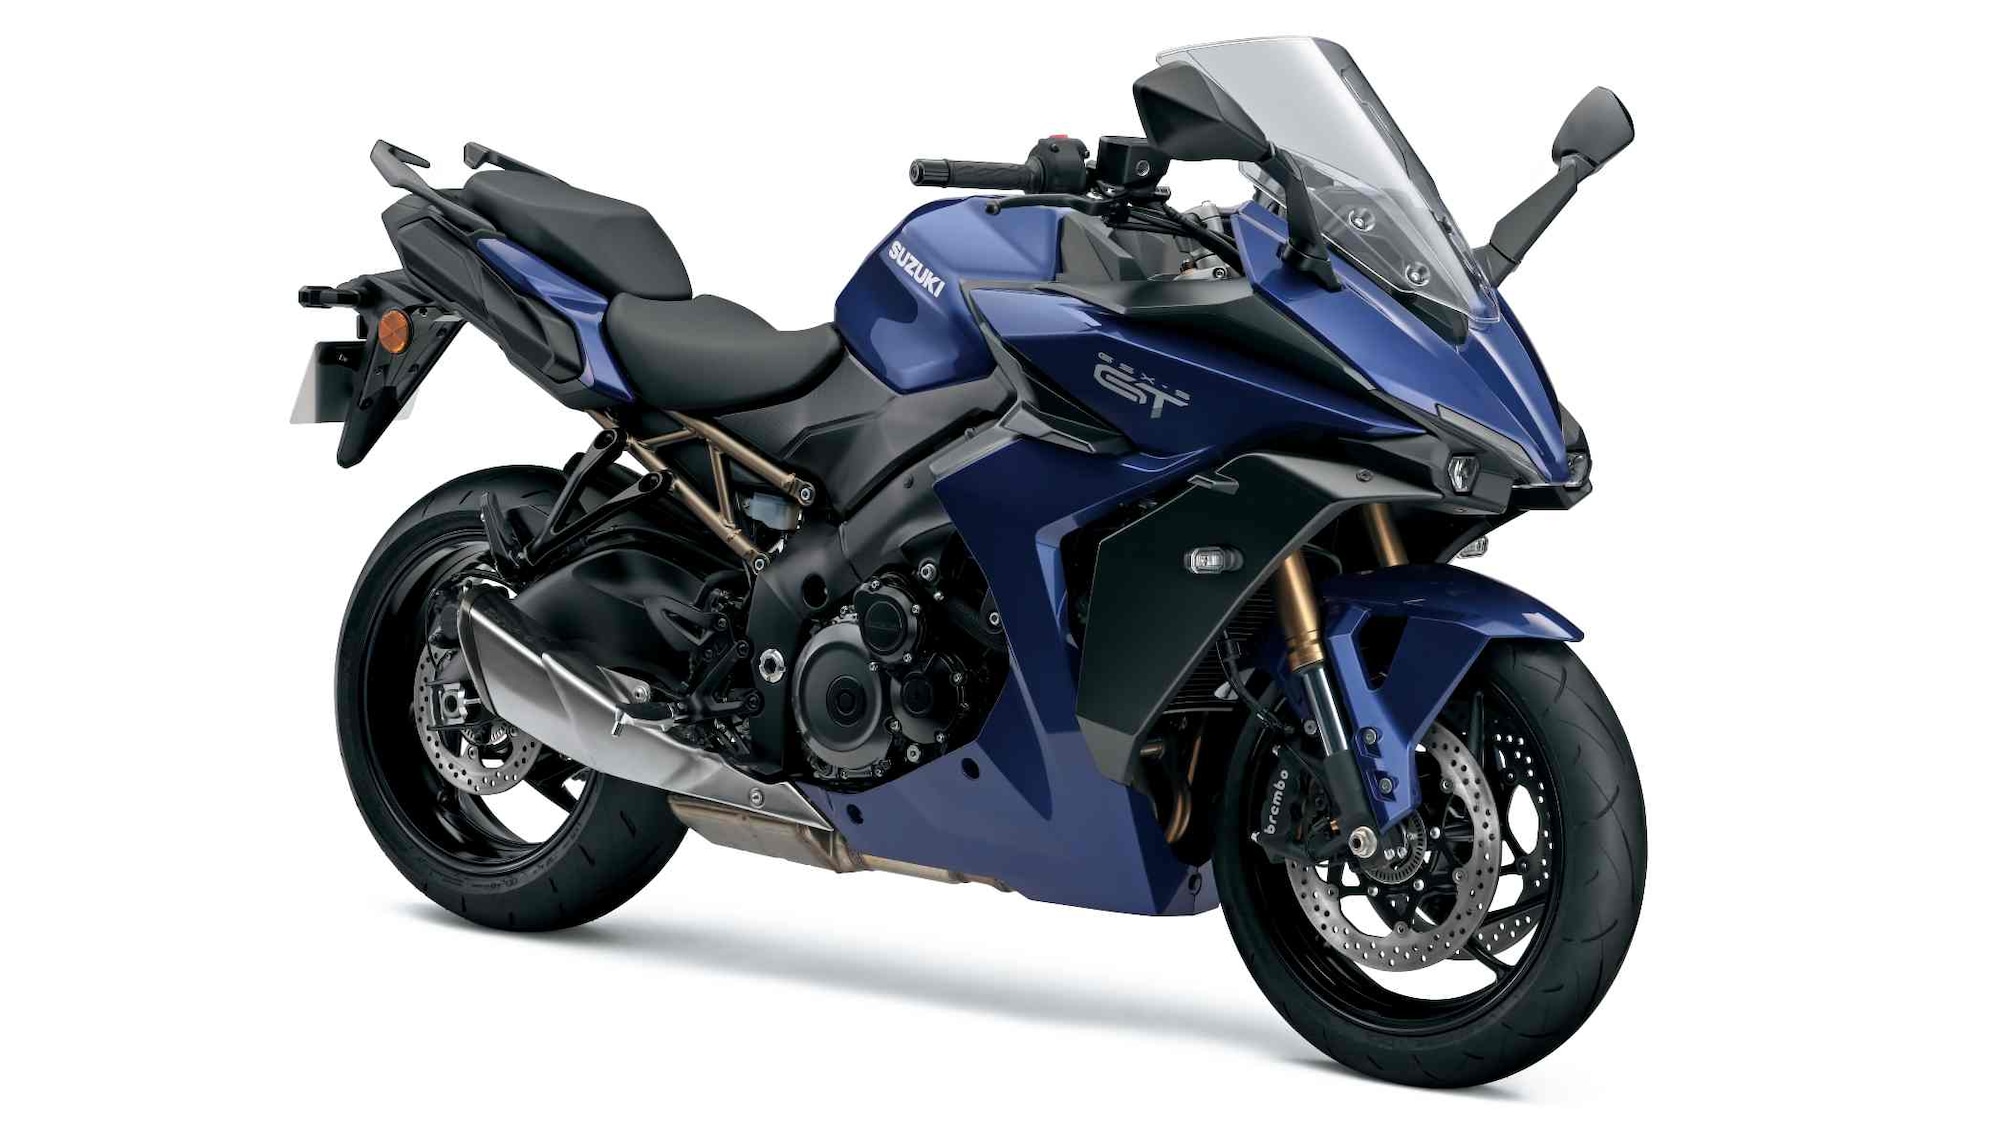 Powering the Suzuki is a 999 cc in-line four-cylinder engine that puts out 150 hp and 106 Nm. Image: Suzuki